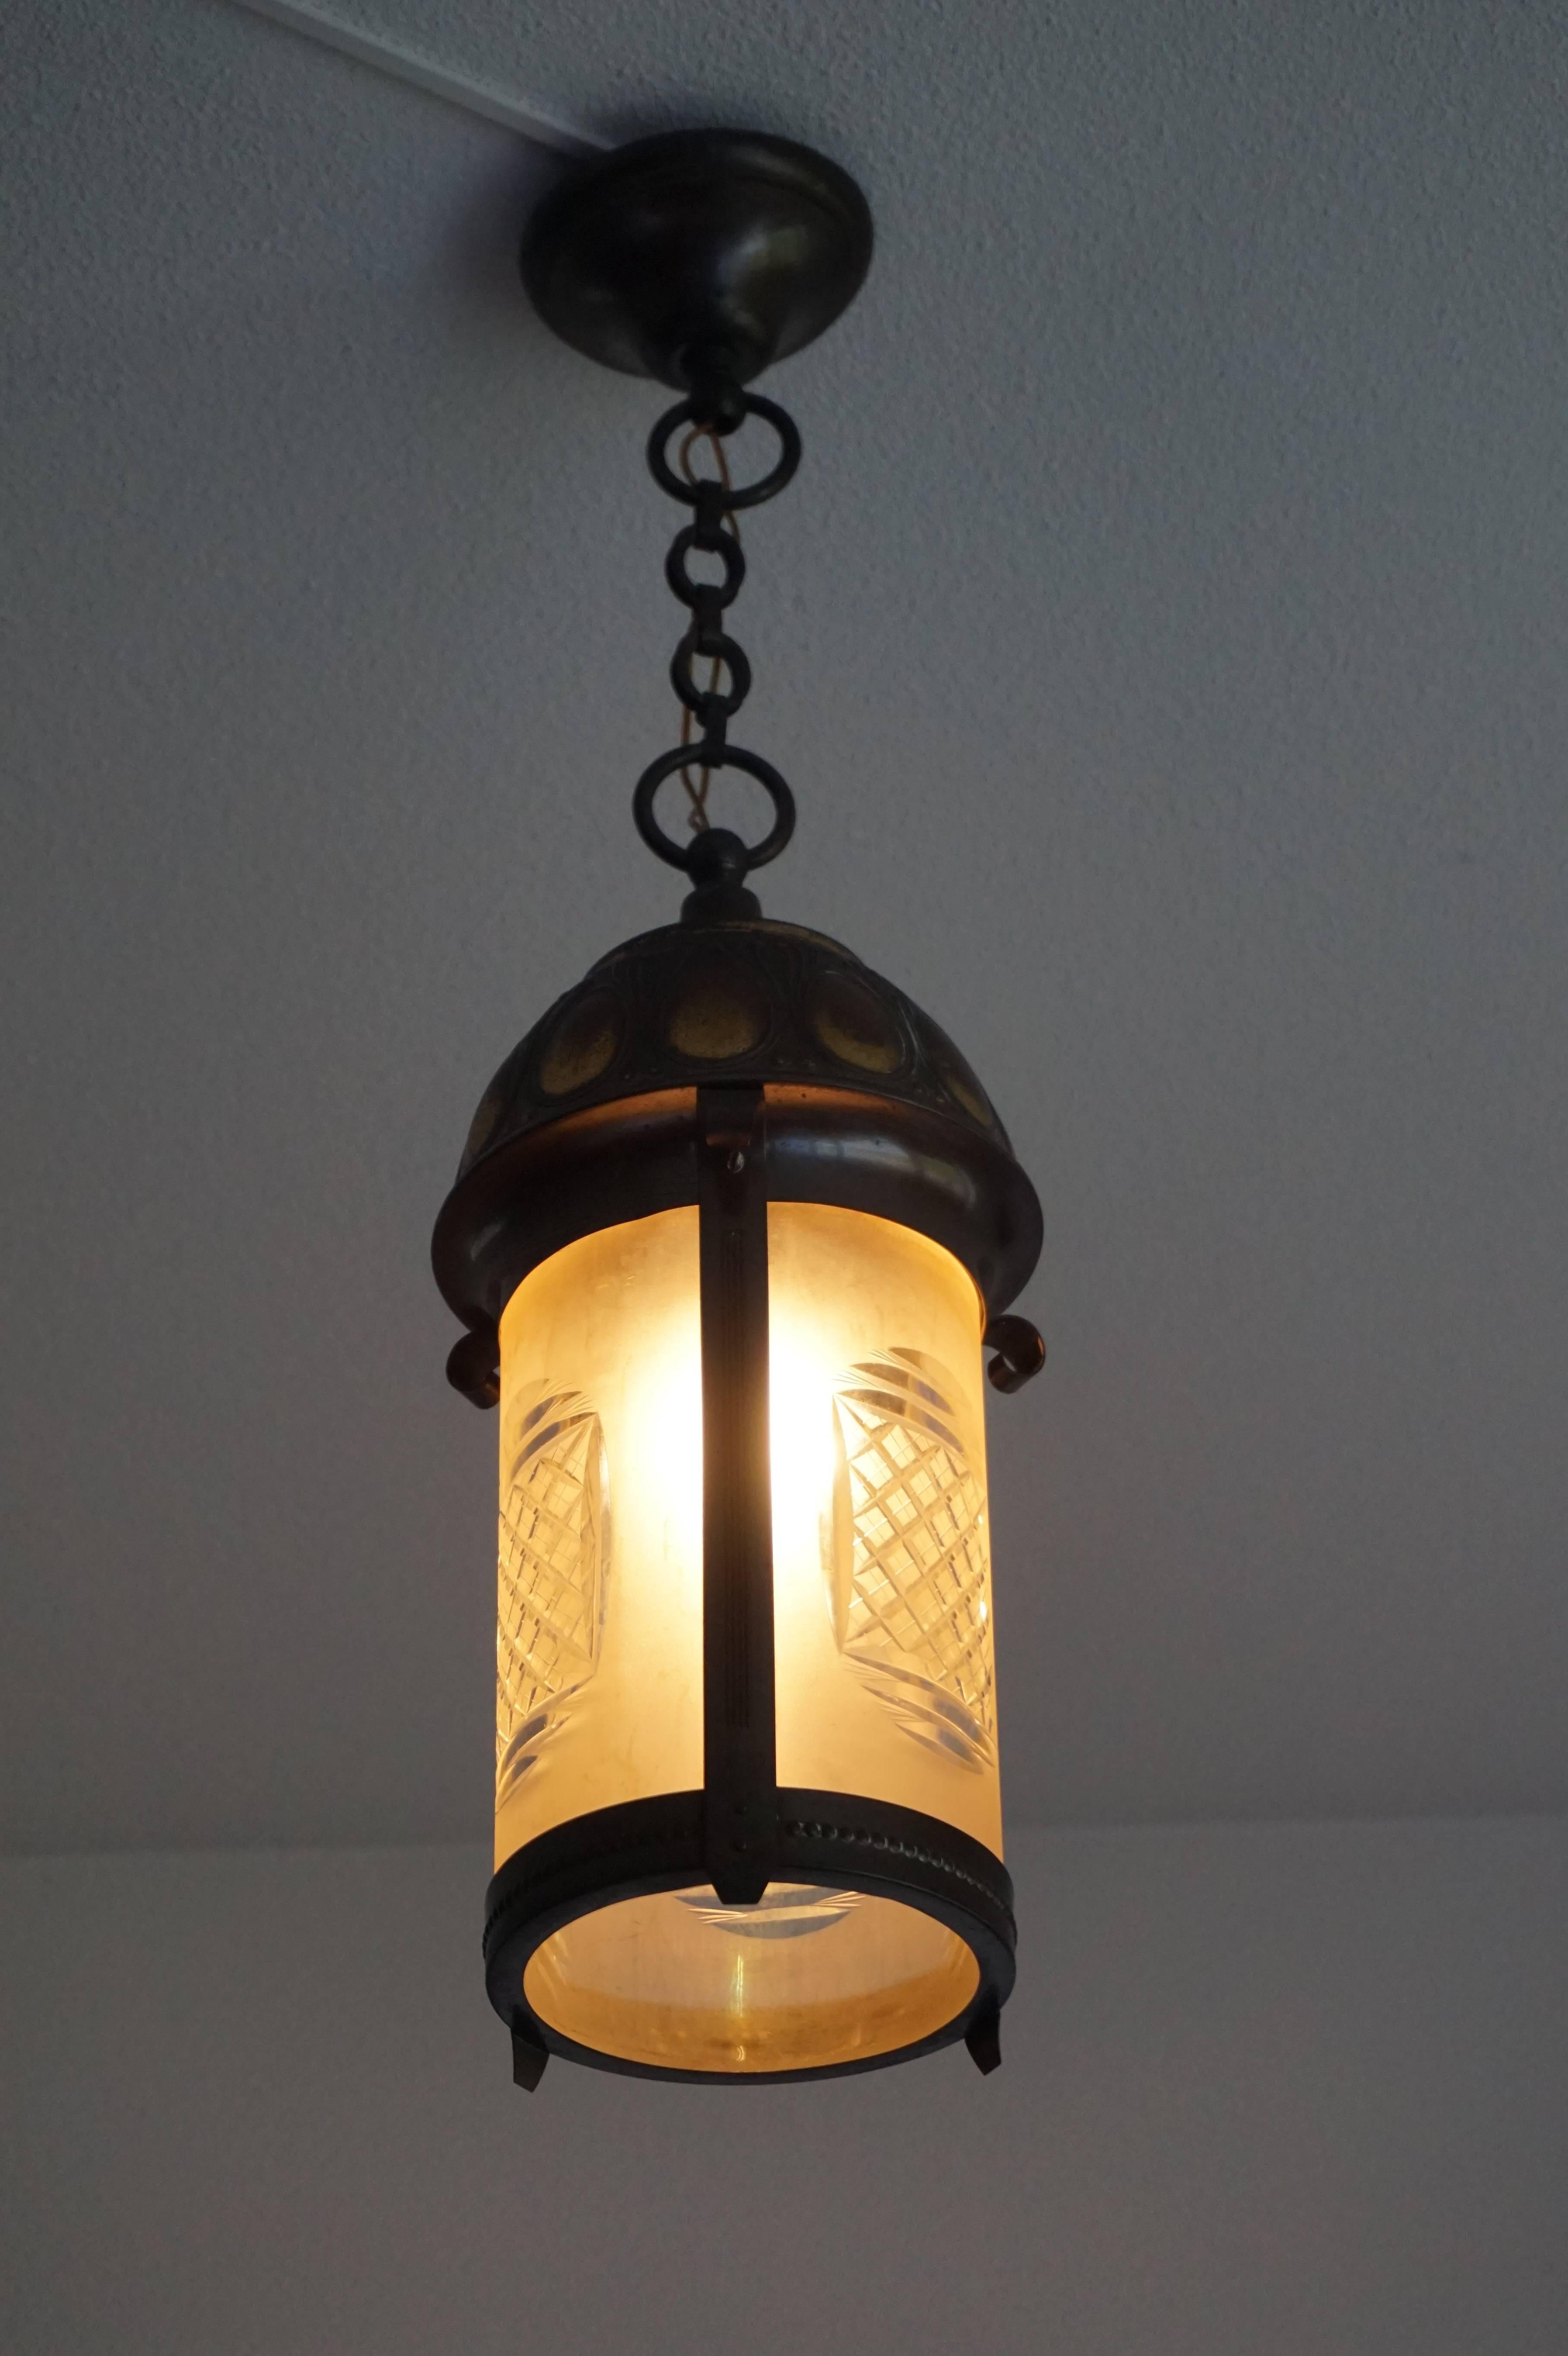 Rare and striking Art Nouveau pendant.

This stylish and lantern-like pendant is a joy to watch and it will create a beautiful atmosphere wherever you decide to use it. All hand-crafted in circa 1900 this rare light fixture has a wonderfully